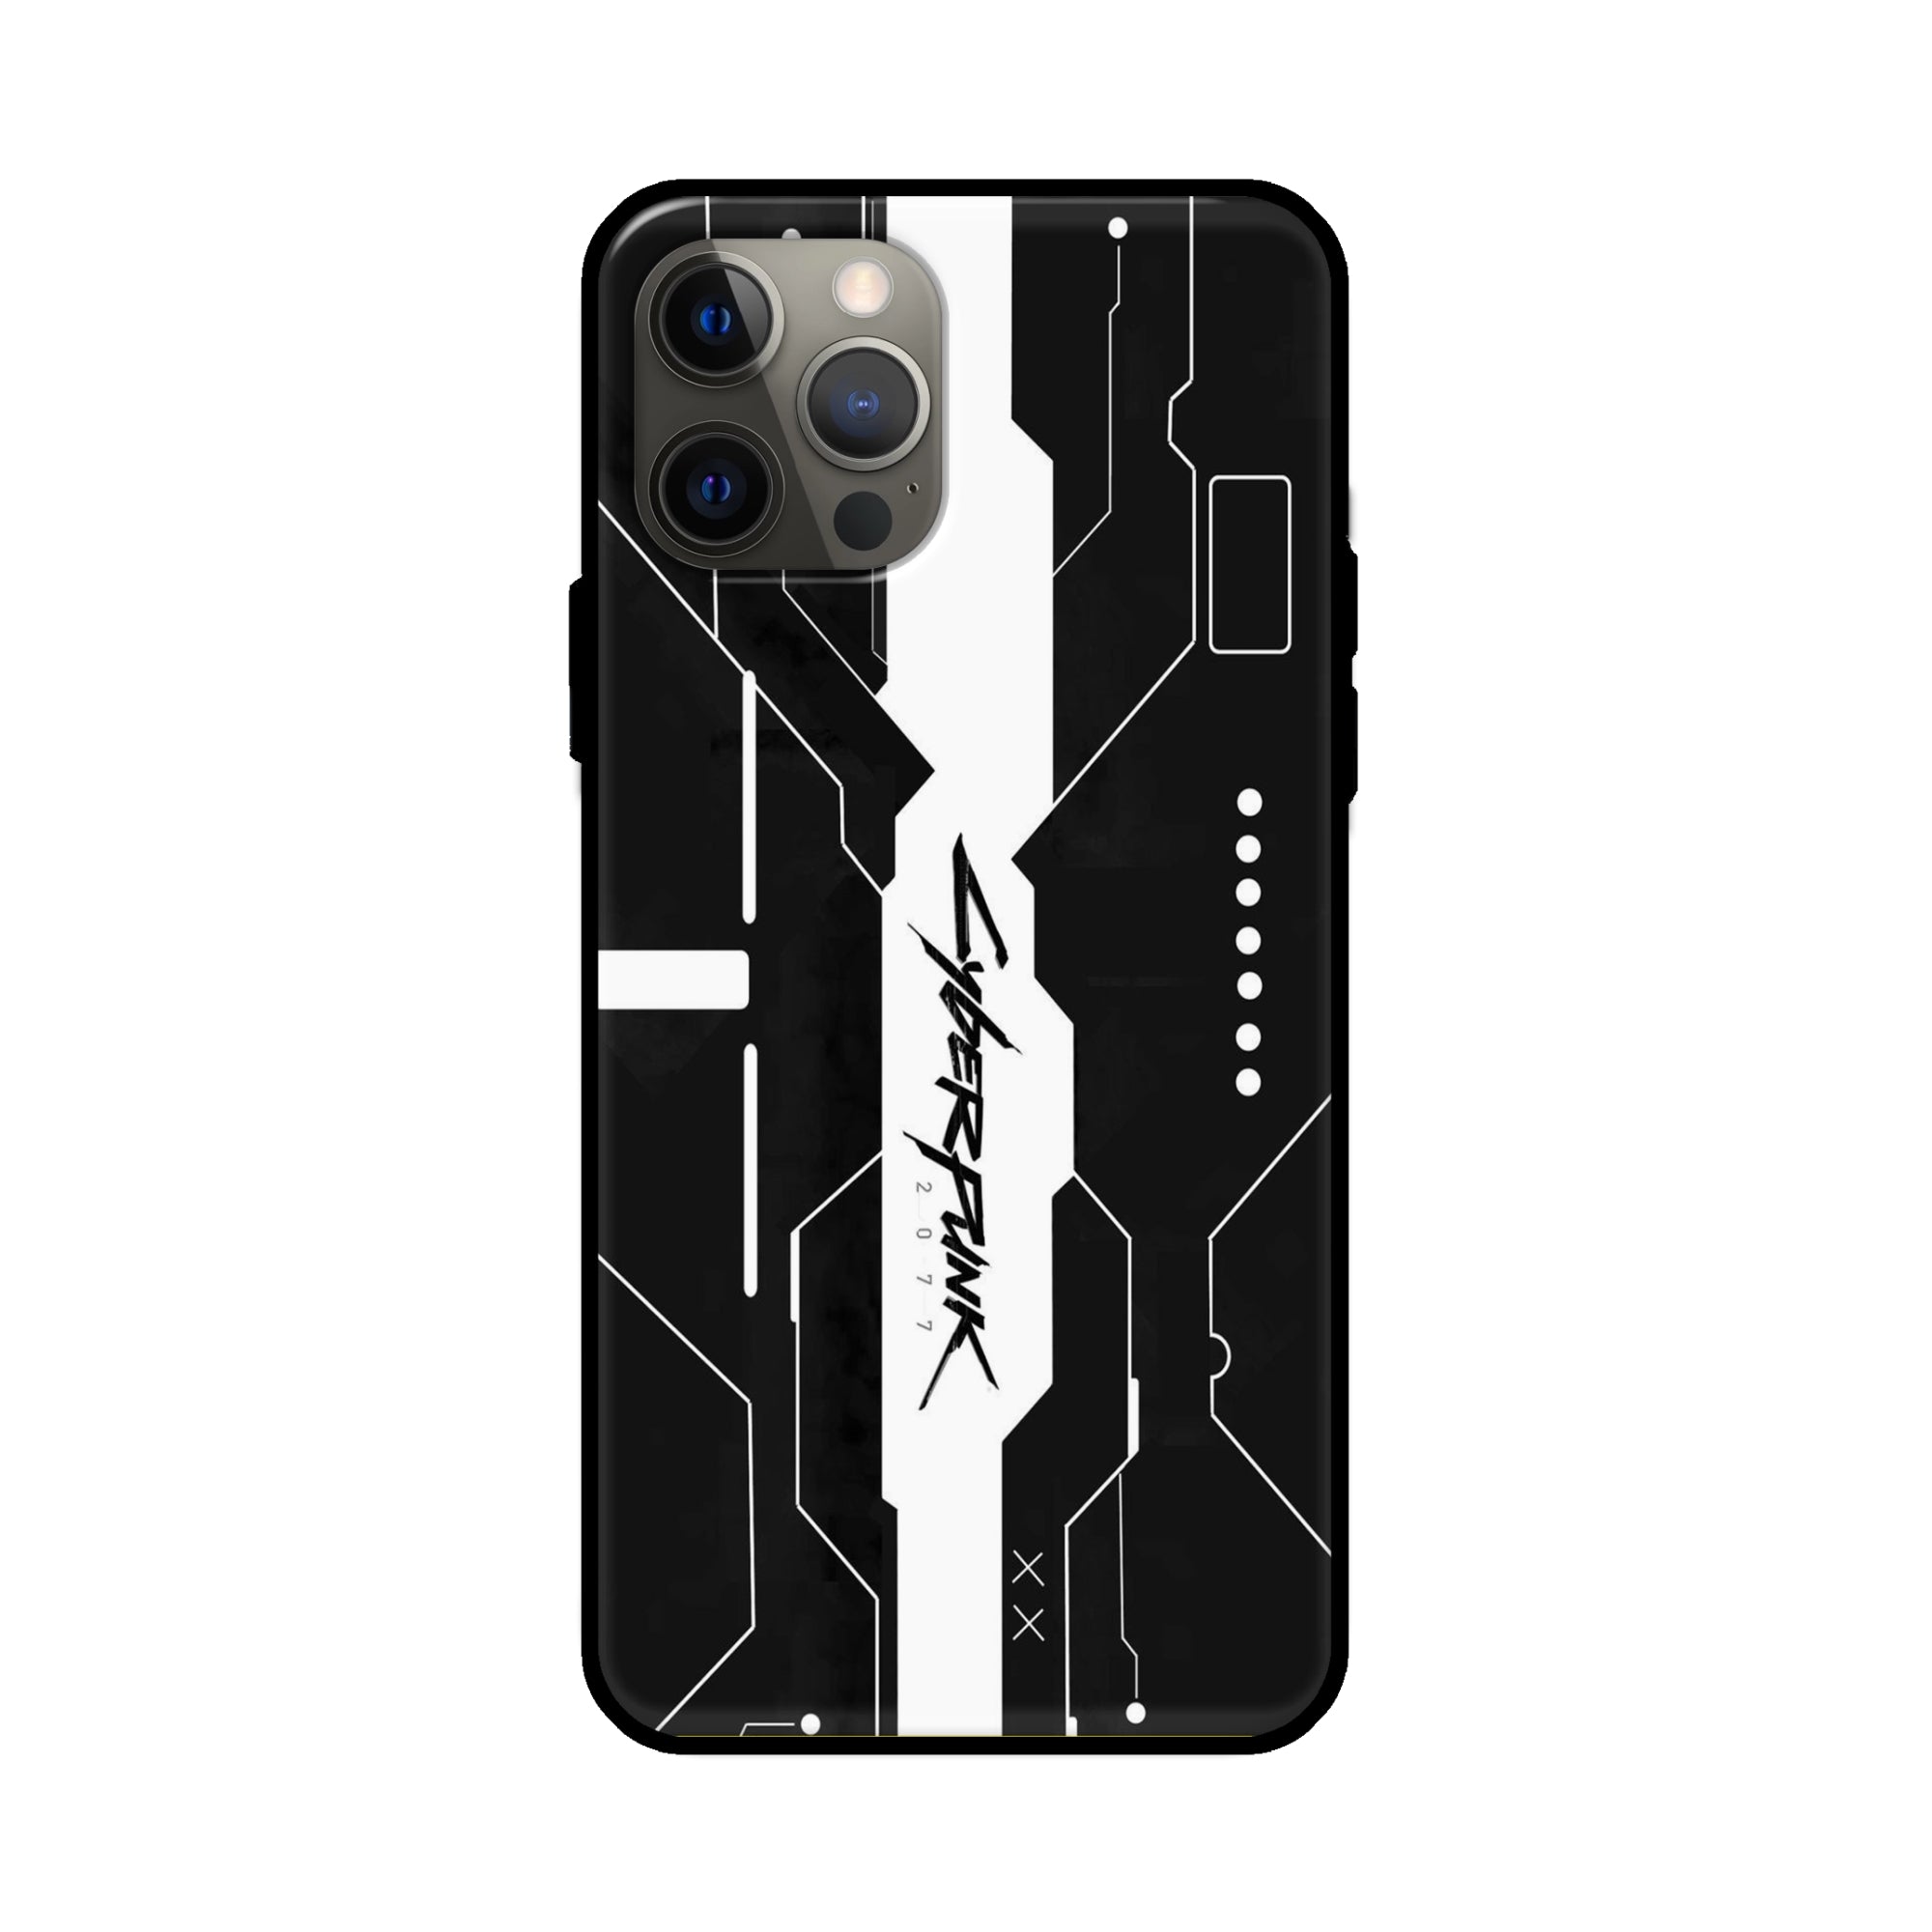 Buy Cyberpunk 2077 Art Glass/Metal Back Mobile Phone Case/Cover For Apple iPhone 12 pro max Online